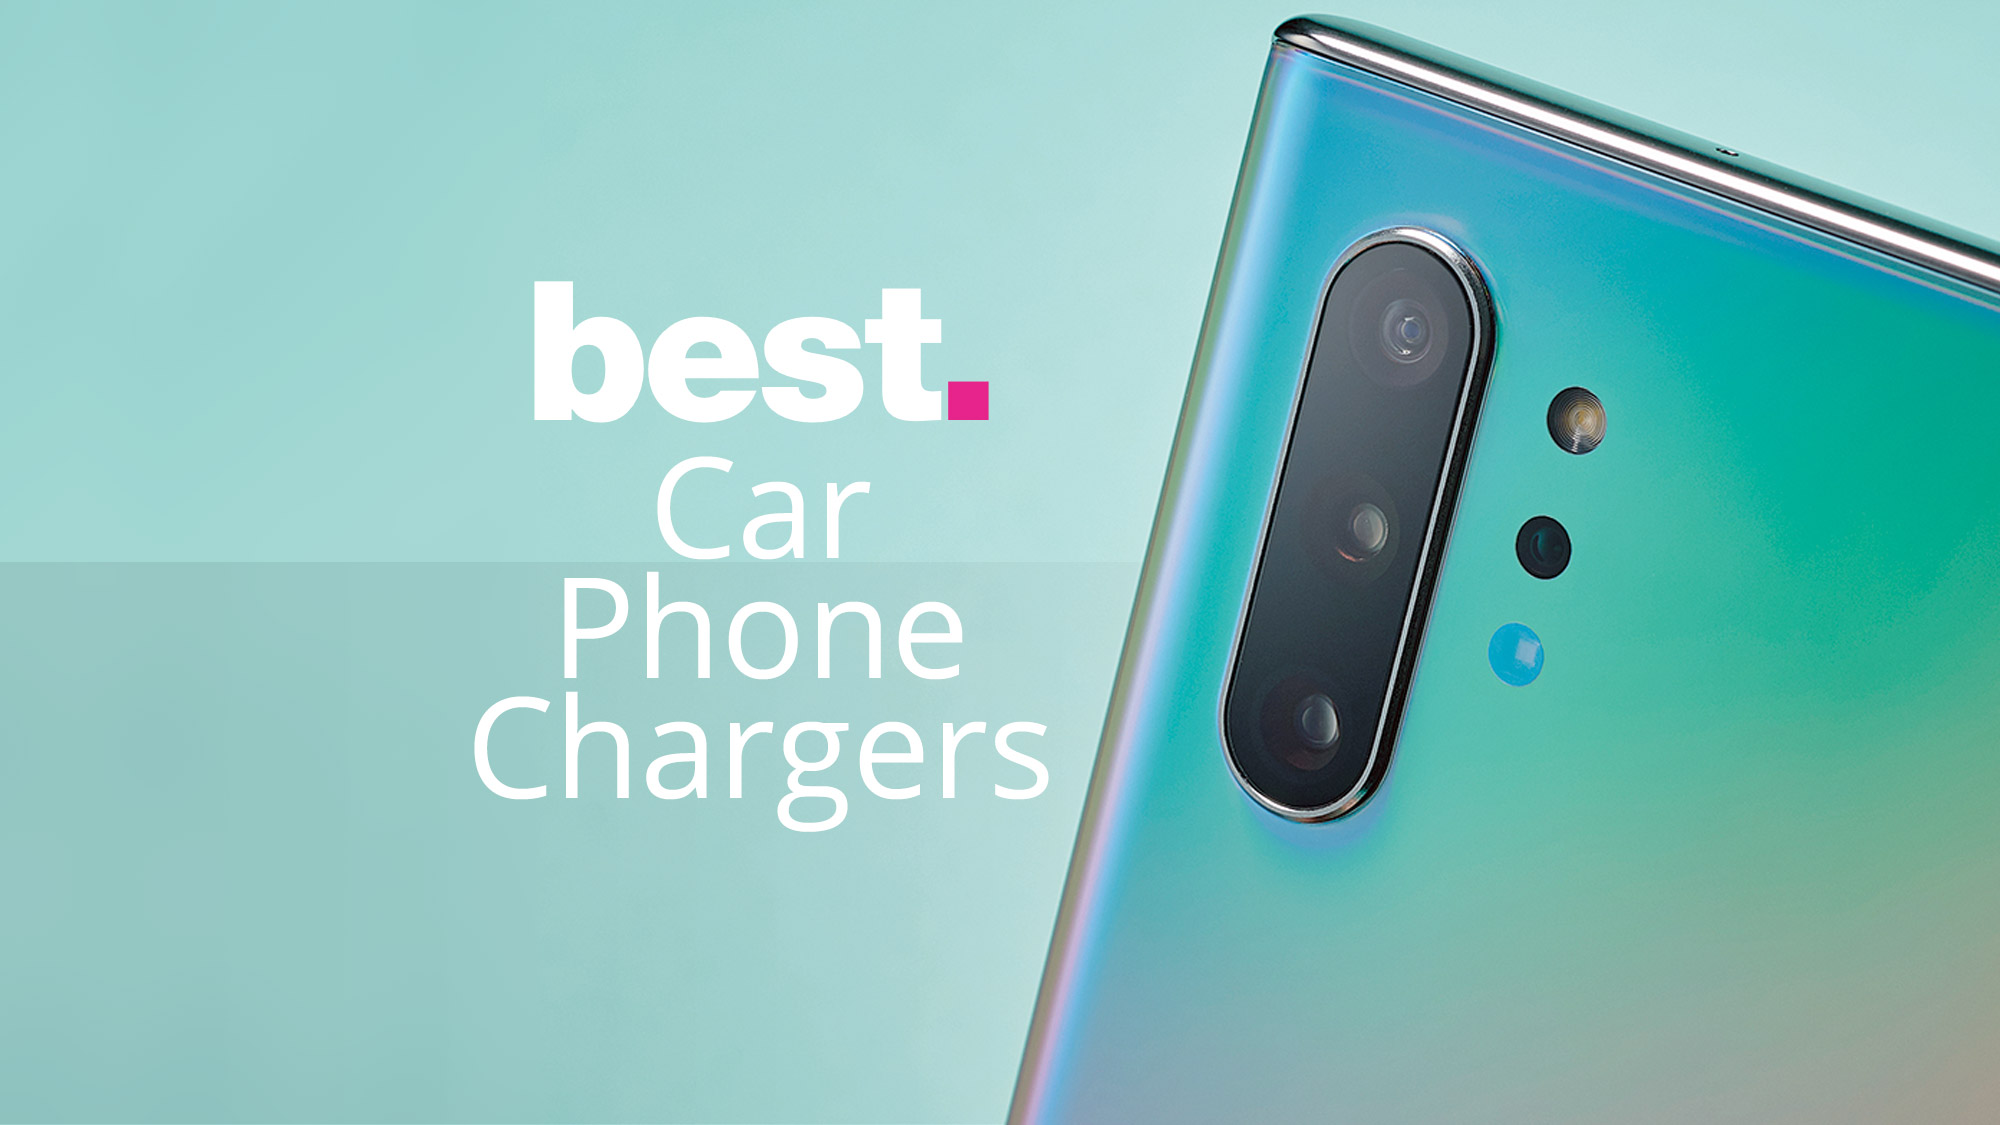 The best car phone chargers 2019: keep 